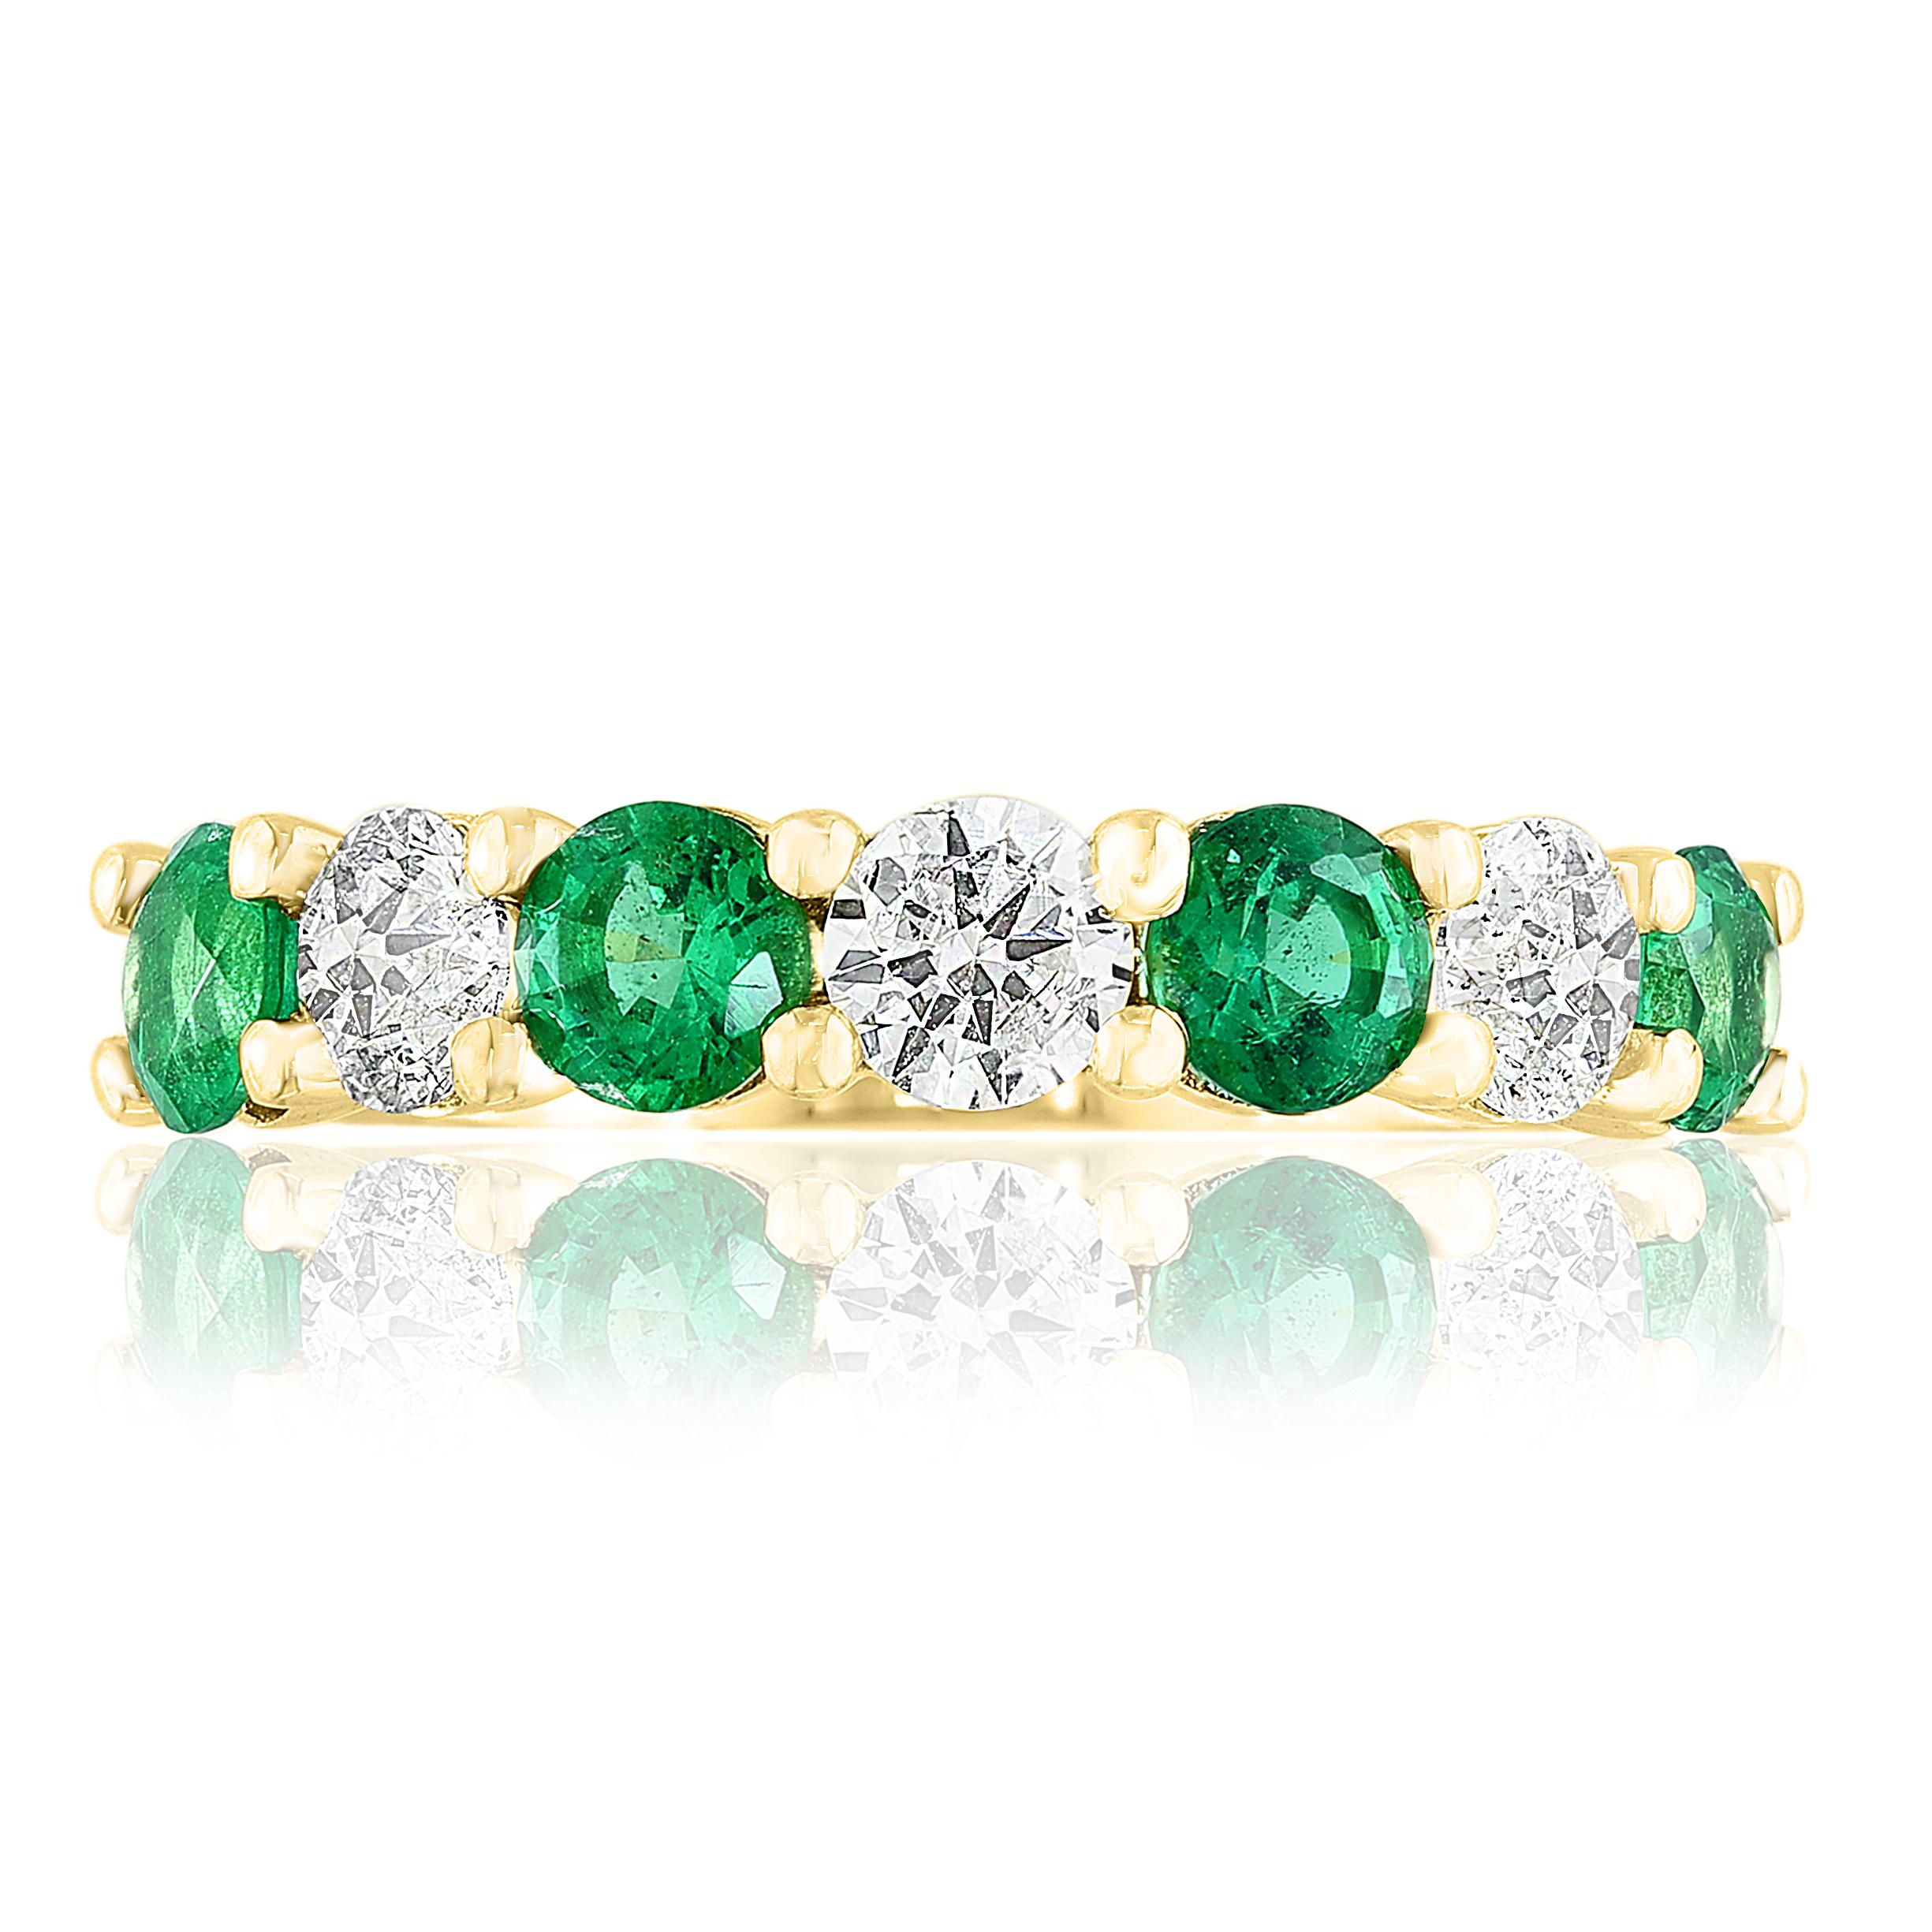 A fashionable and classic wedding band showcasing 4 color-rich green emeralds weighing 0.97 carats total that alternate with 3 brilliant round diamonds weighing 0.73 carats total. Stones secured with a shared prong setting made with 14 karats yellow